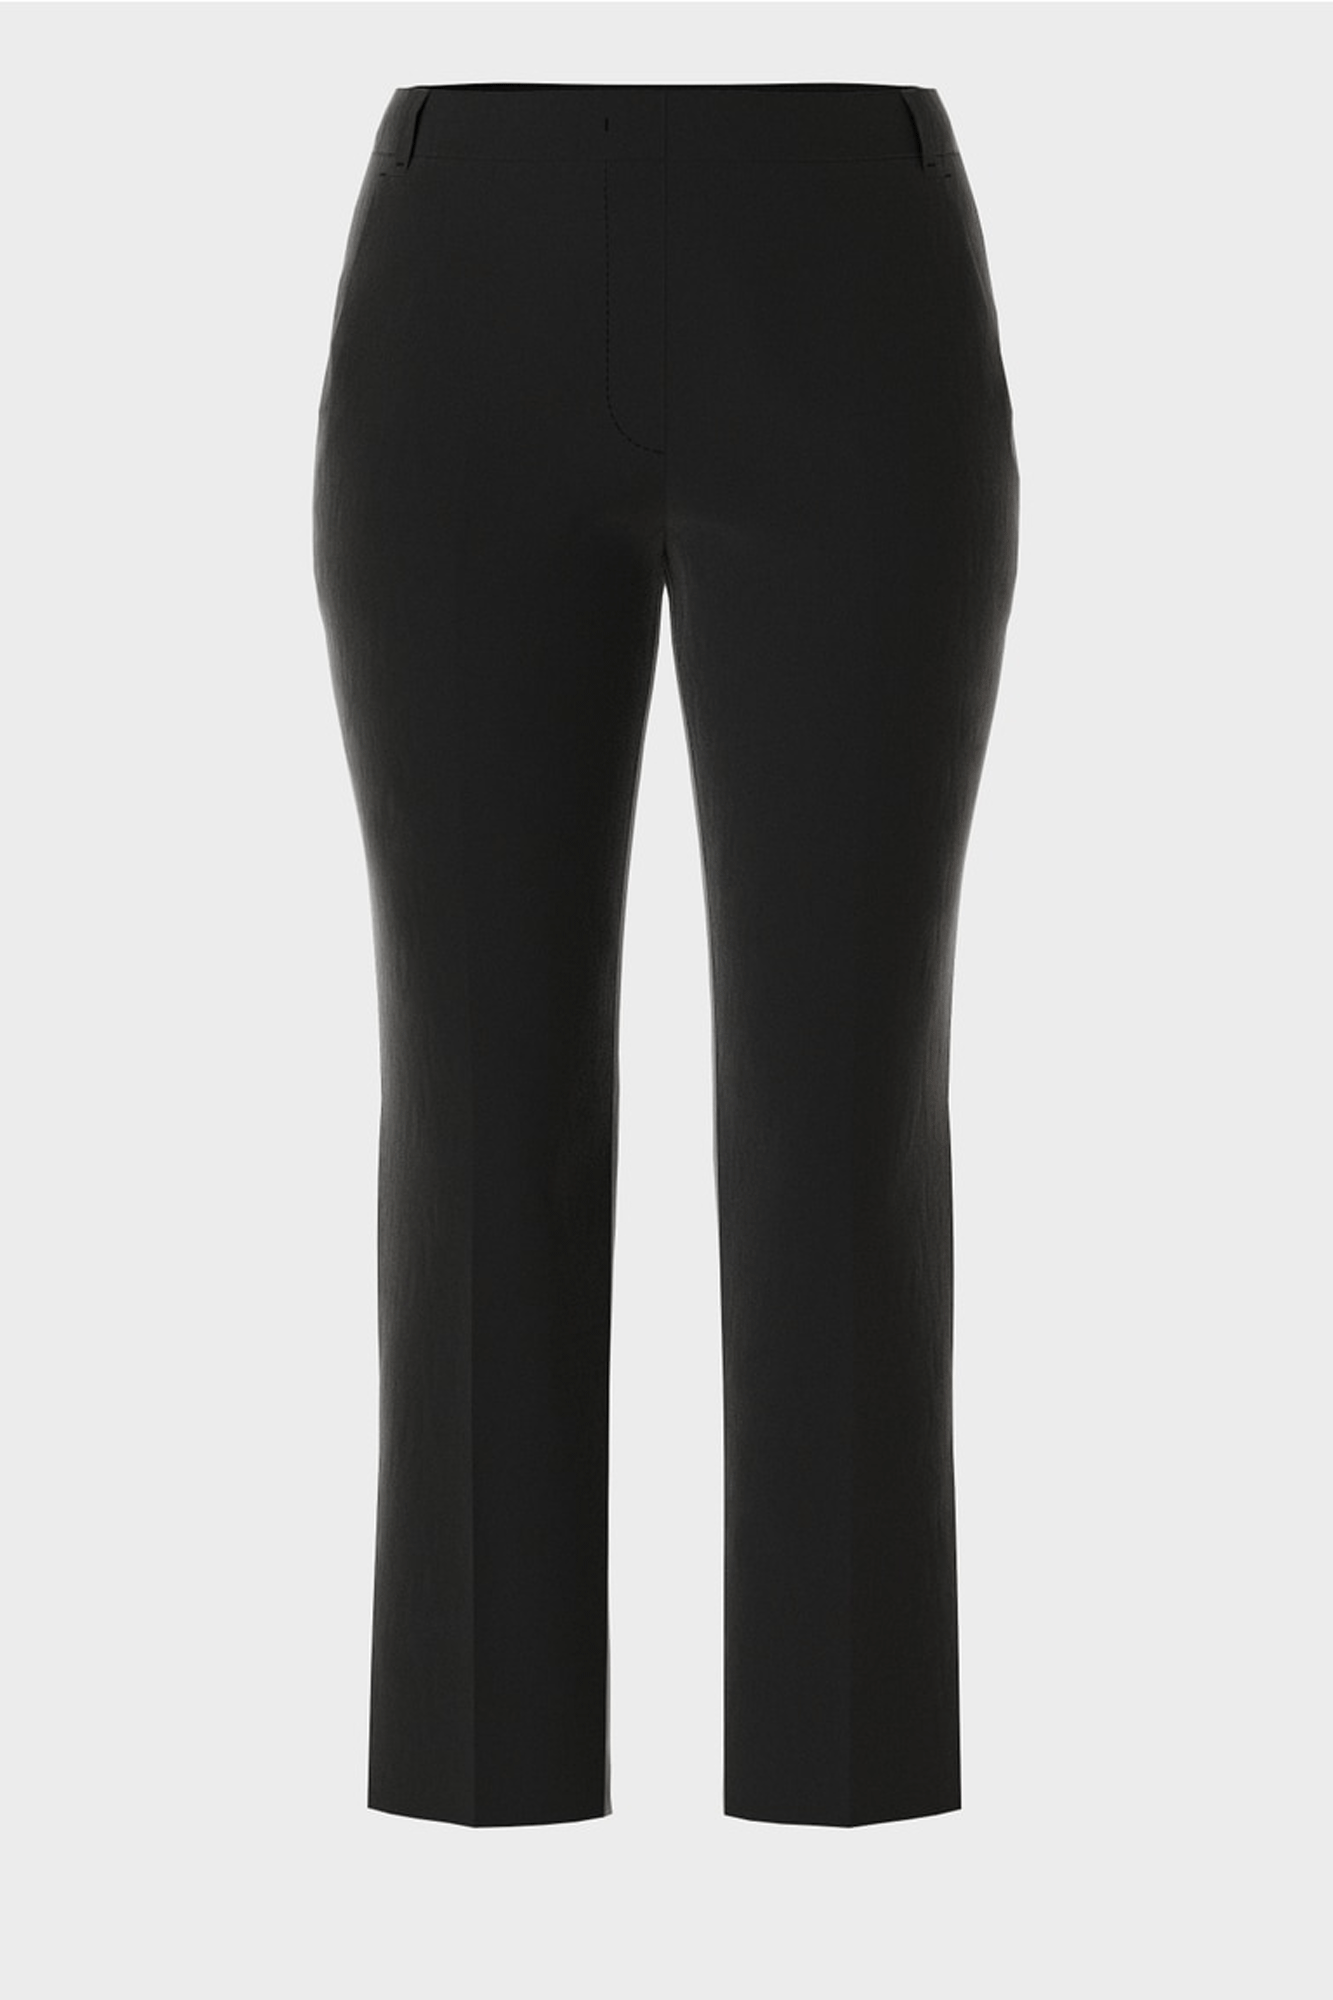 The FUZHOU Timeless Bloom Pants from Marc Cain offer an impeccable fit made from a durable blend of wool and other fibers. The narrow waistband, roomy hip and wide legs create a timeless silhouette. The classic features include creases, French pockets, a zip and hook closure. Look sharp in this timeless design.